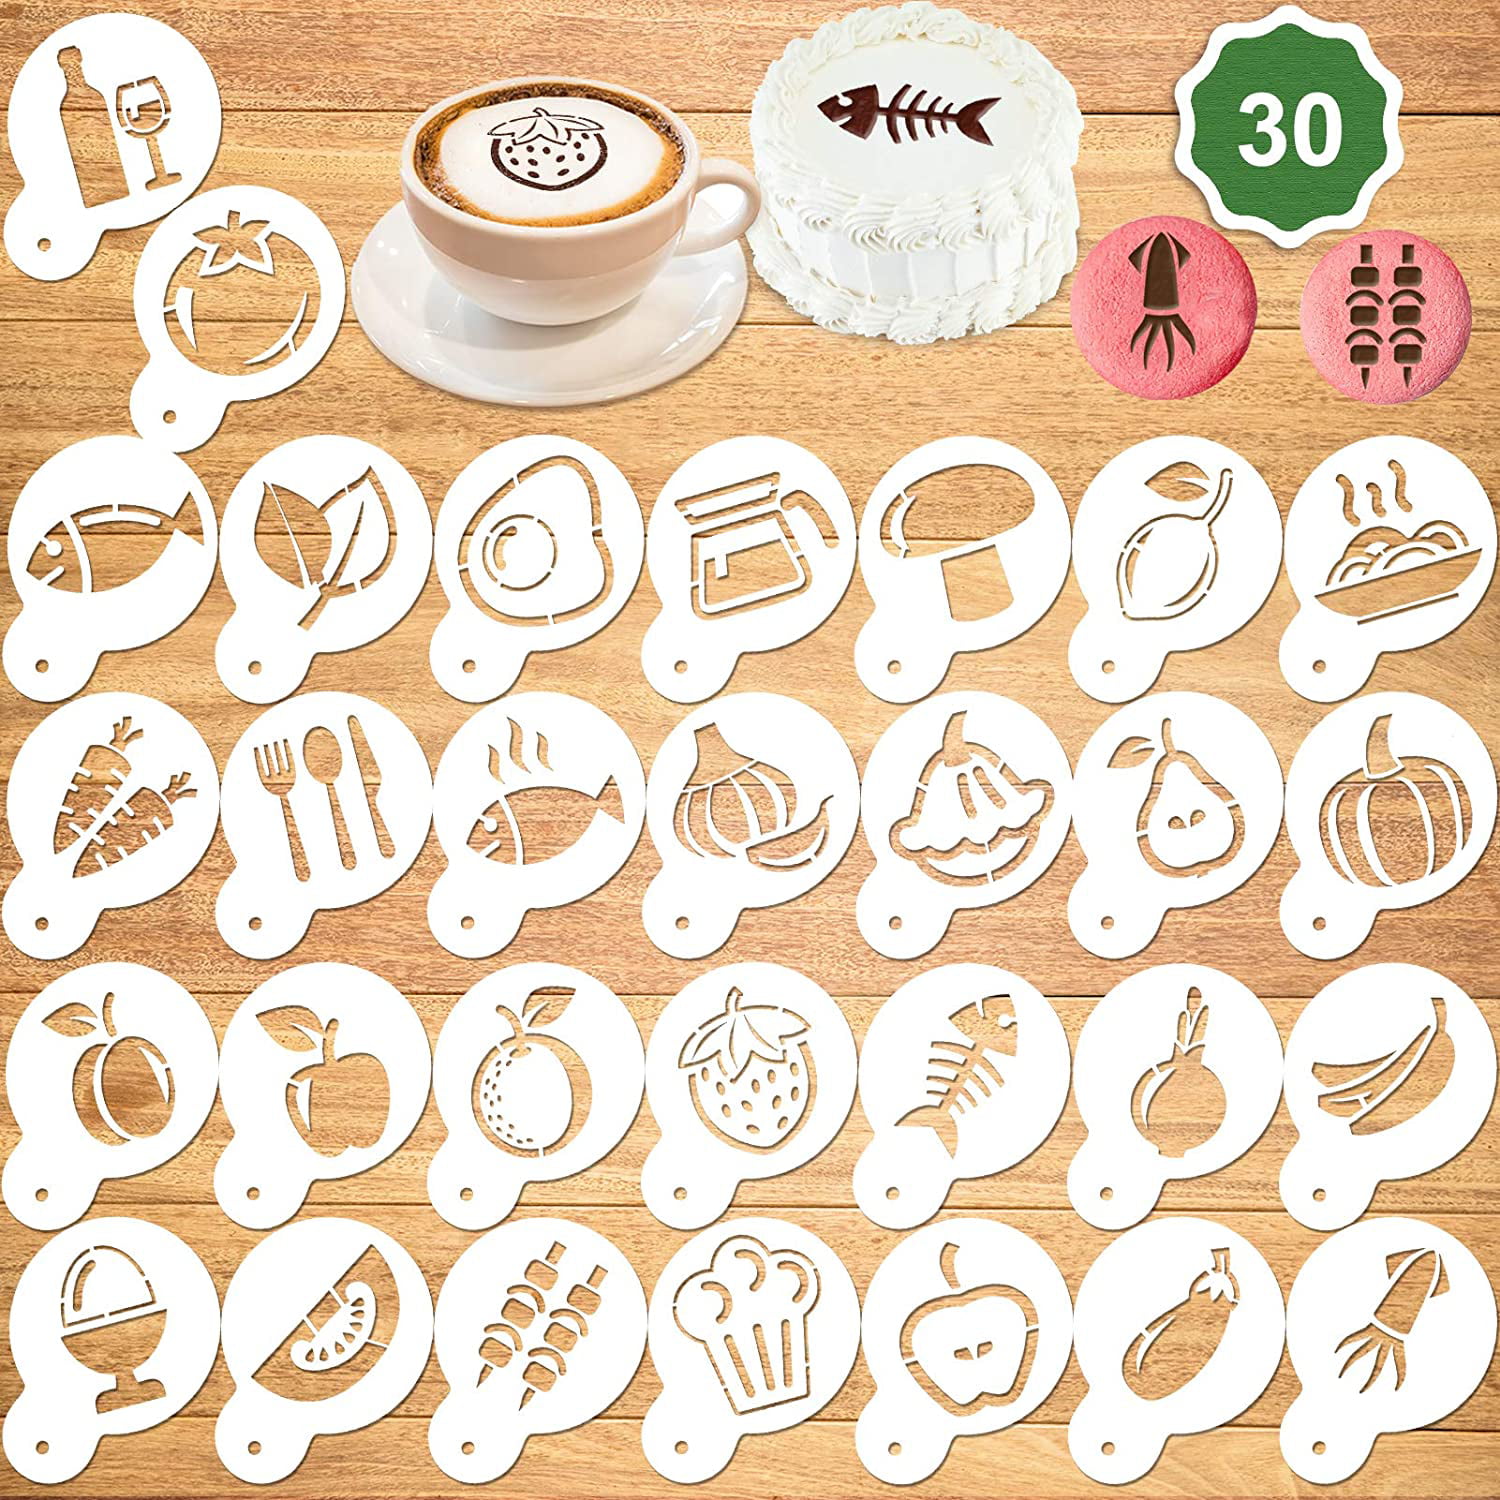 4X Cookie Stencil Mold Kit Cake Decorating Baking Tool Cappuccino Coffe I8T7 